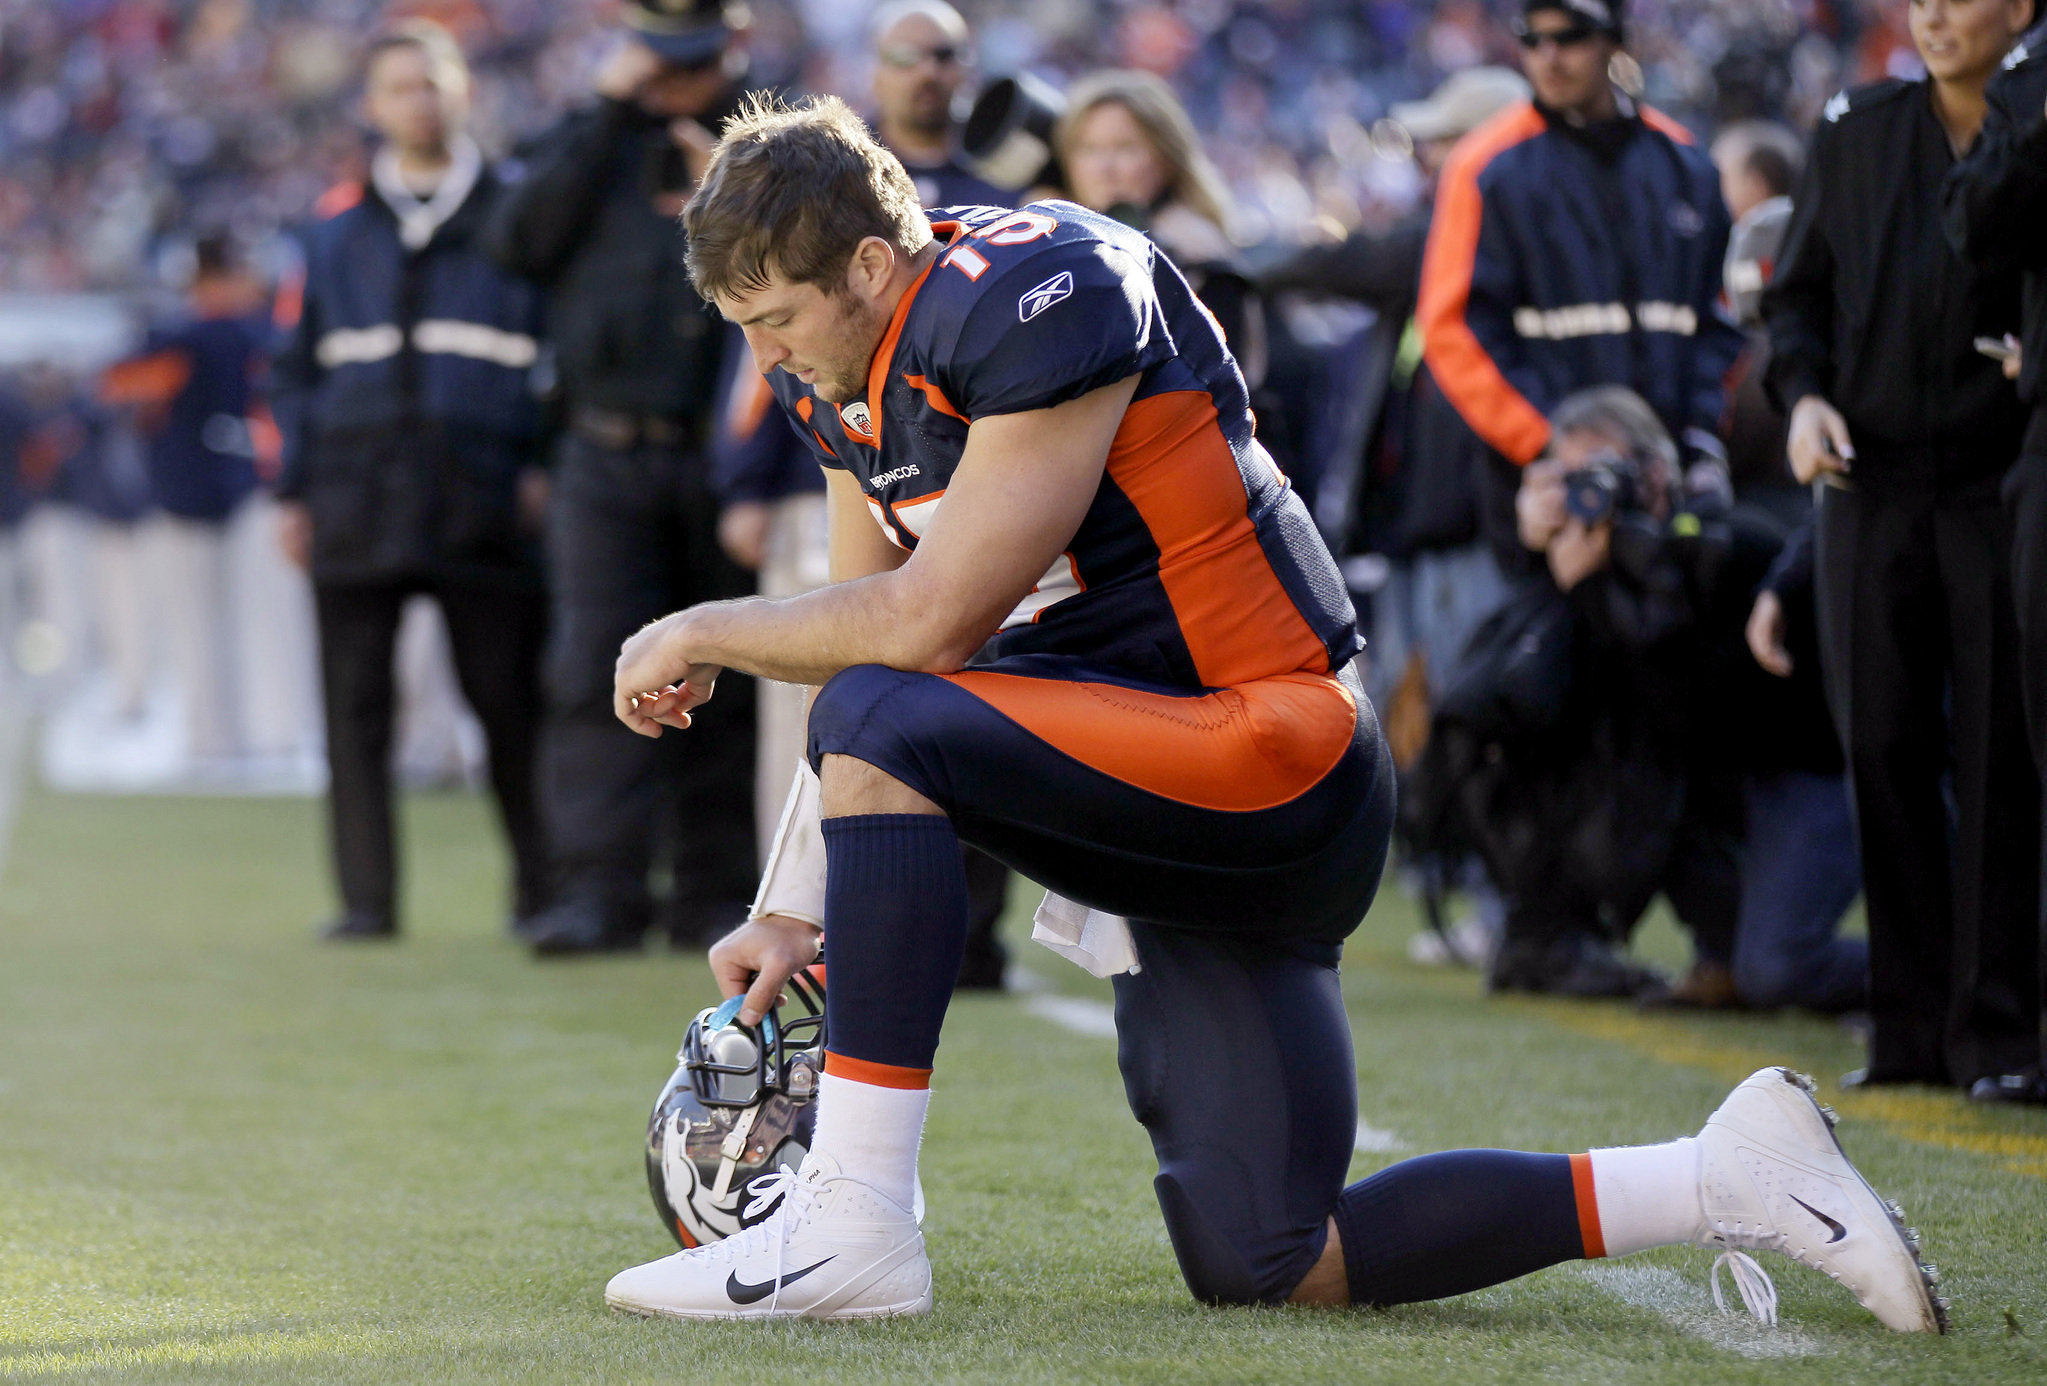 NESN.com Photochop: Where Will Tim Tebow Be 'Tebowing' in New York and New Jersey?